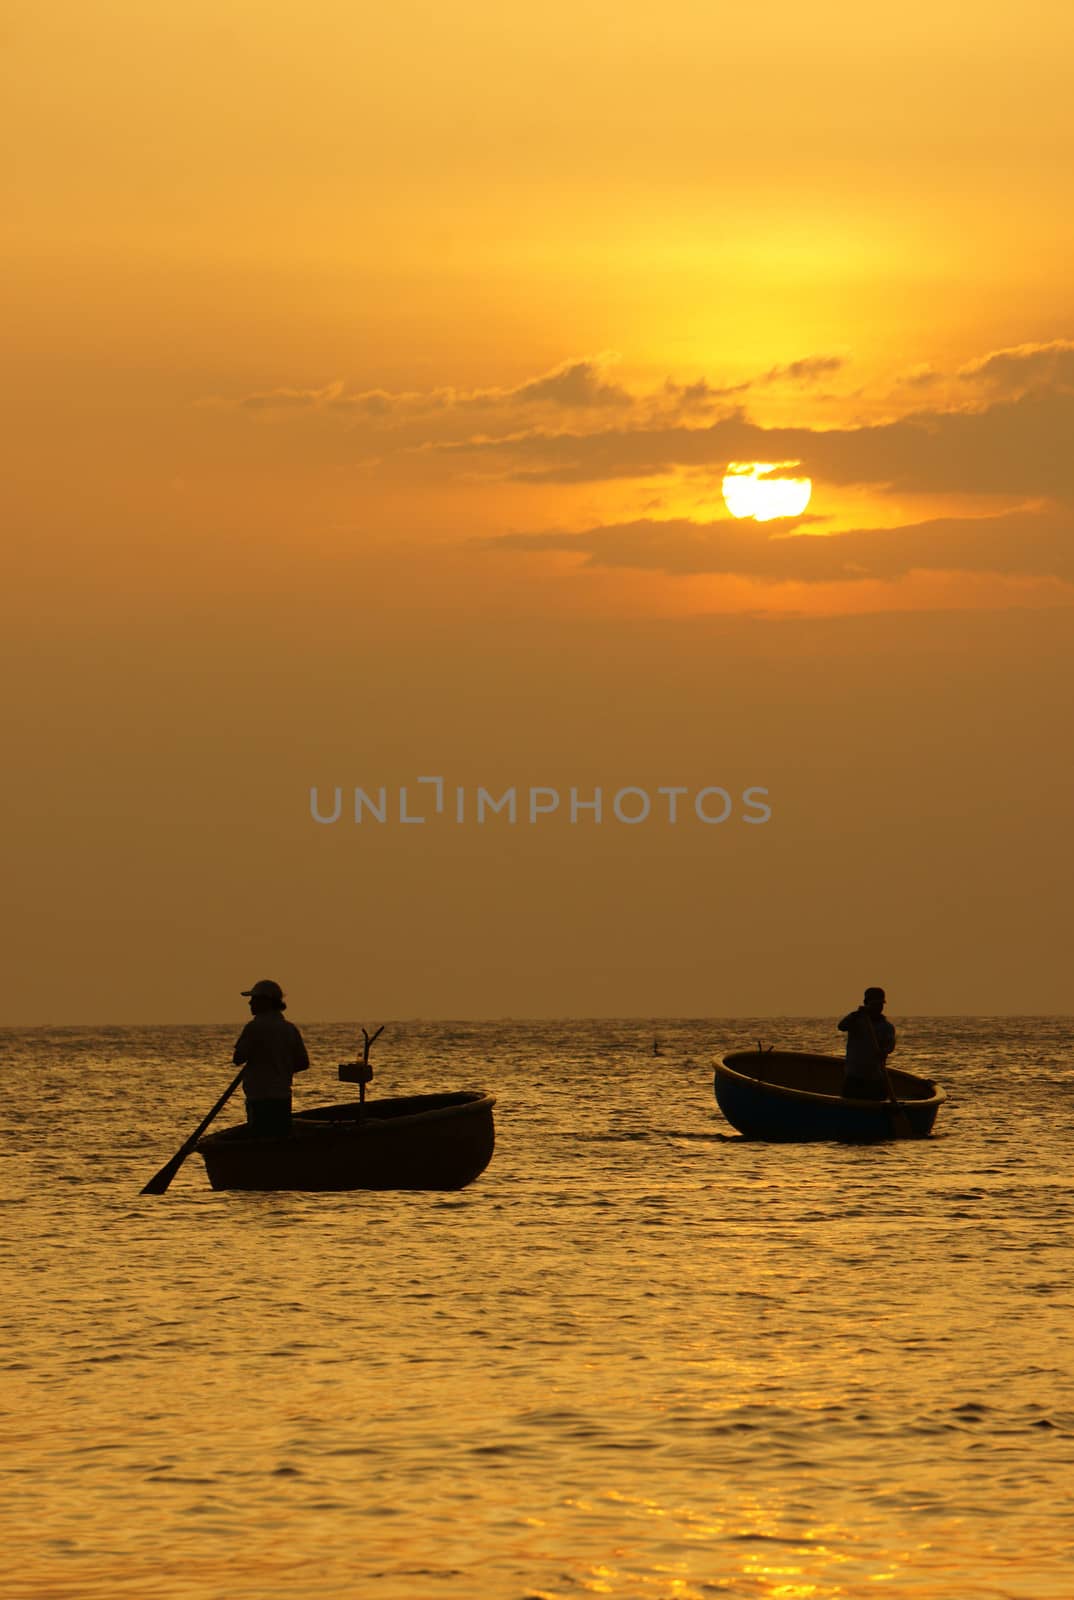 Beautiful landscape on ocean with silhouette of fisherman, sun a by xuanhuongho